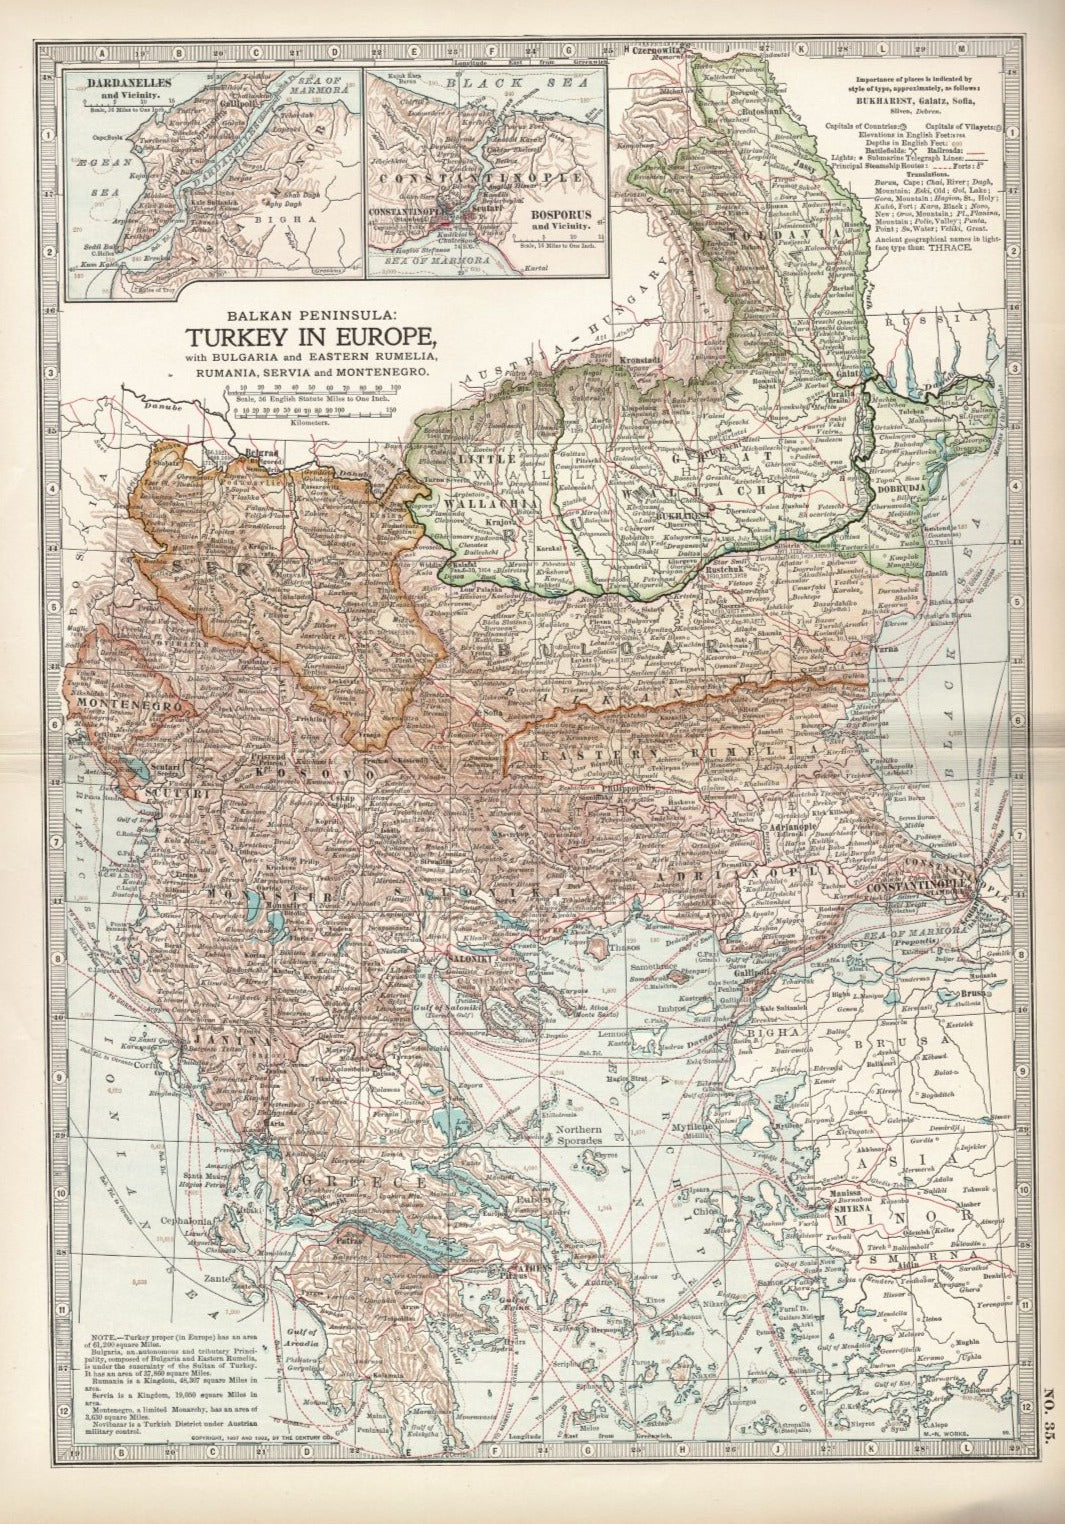 Turkey in Europe antique map from Encyclopaedia Britannica 1903